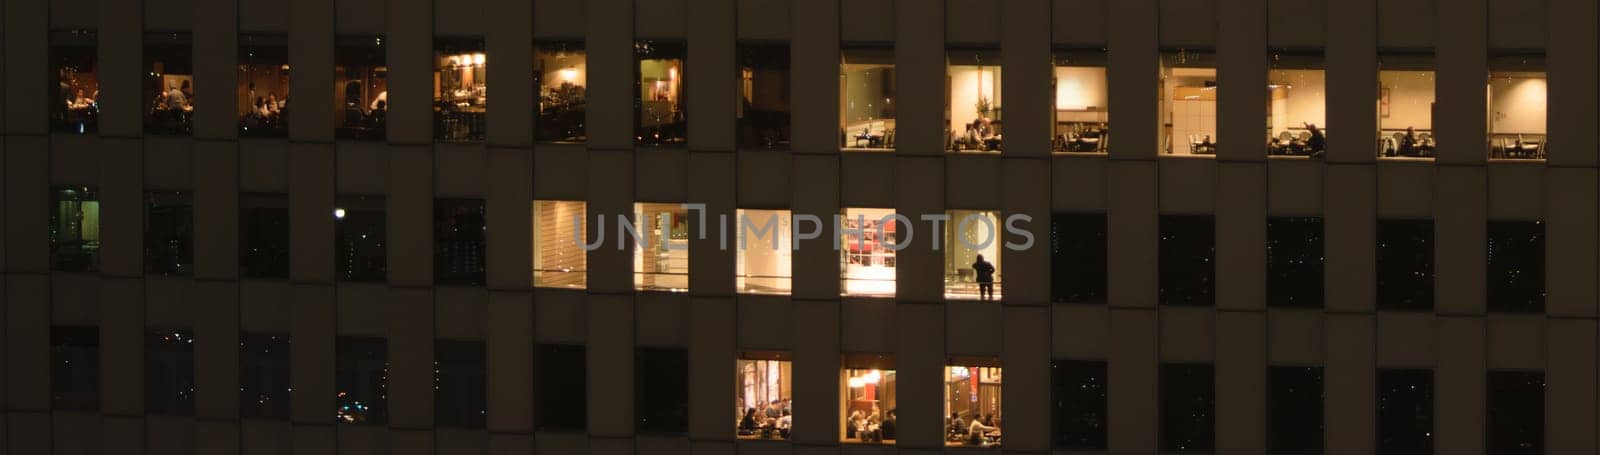 A nighttime view of office blocks